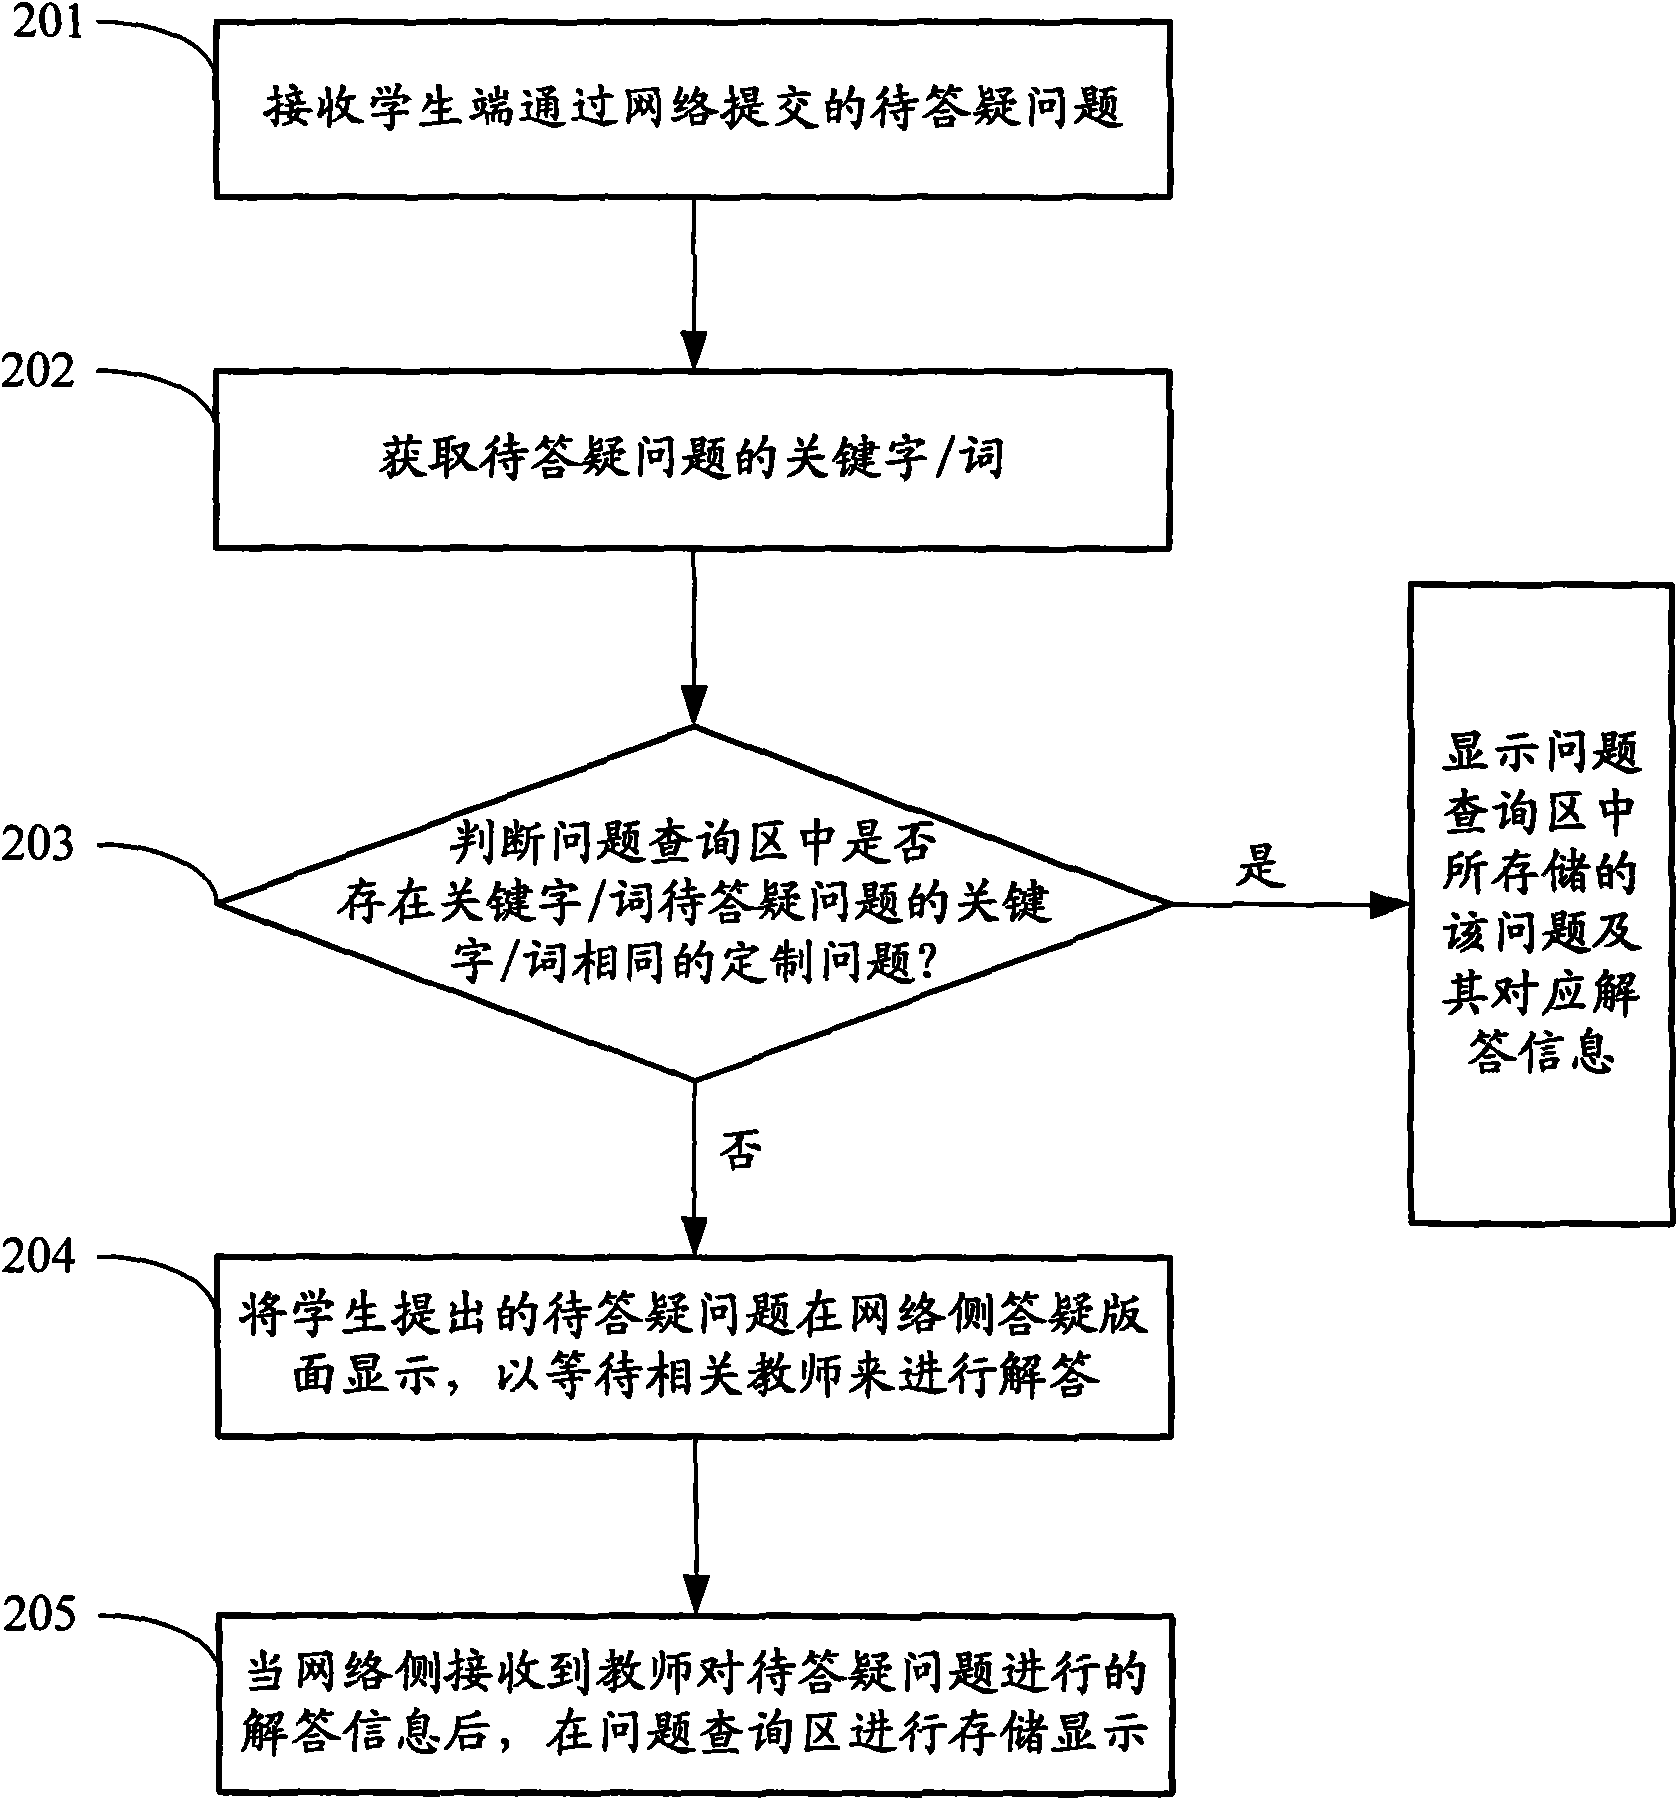 Method for network teaching answering